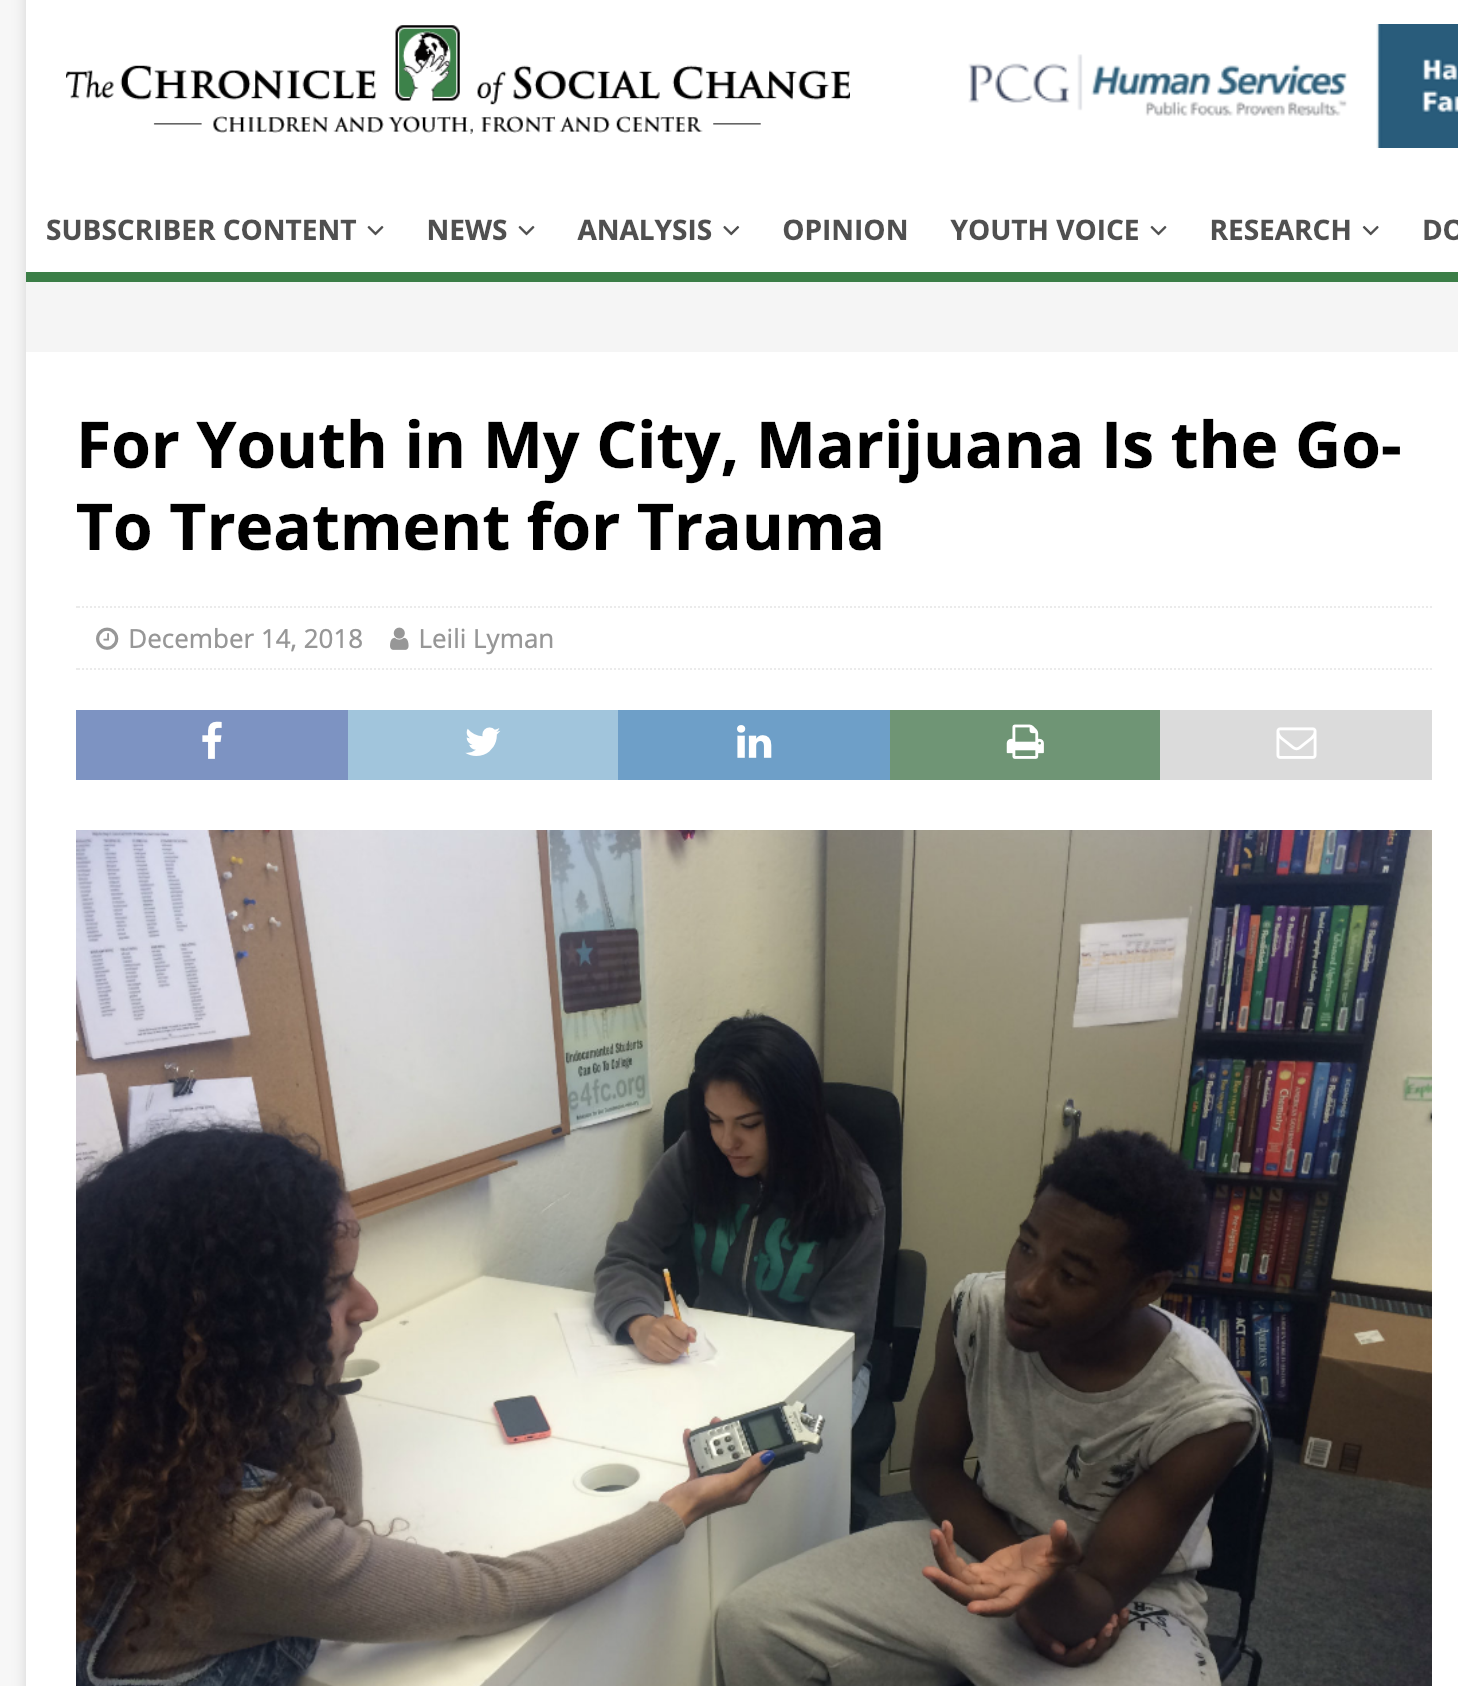 "For Youth in My City, Marijuana Is the Go-To Treatment for Trauma" A new article by Leili Lyman